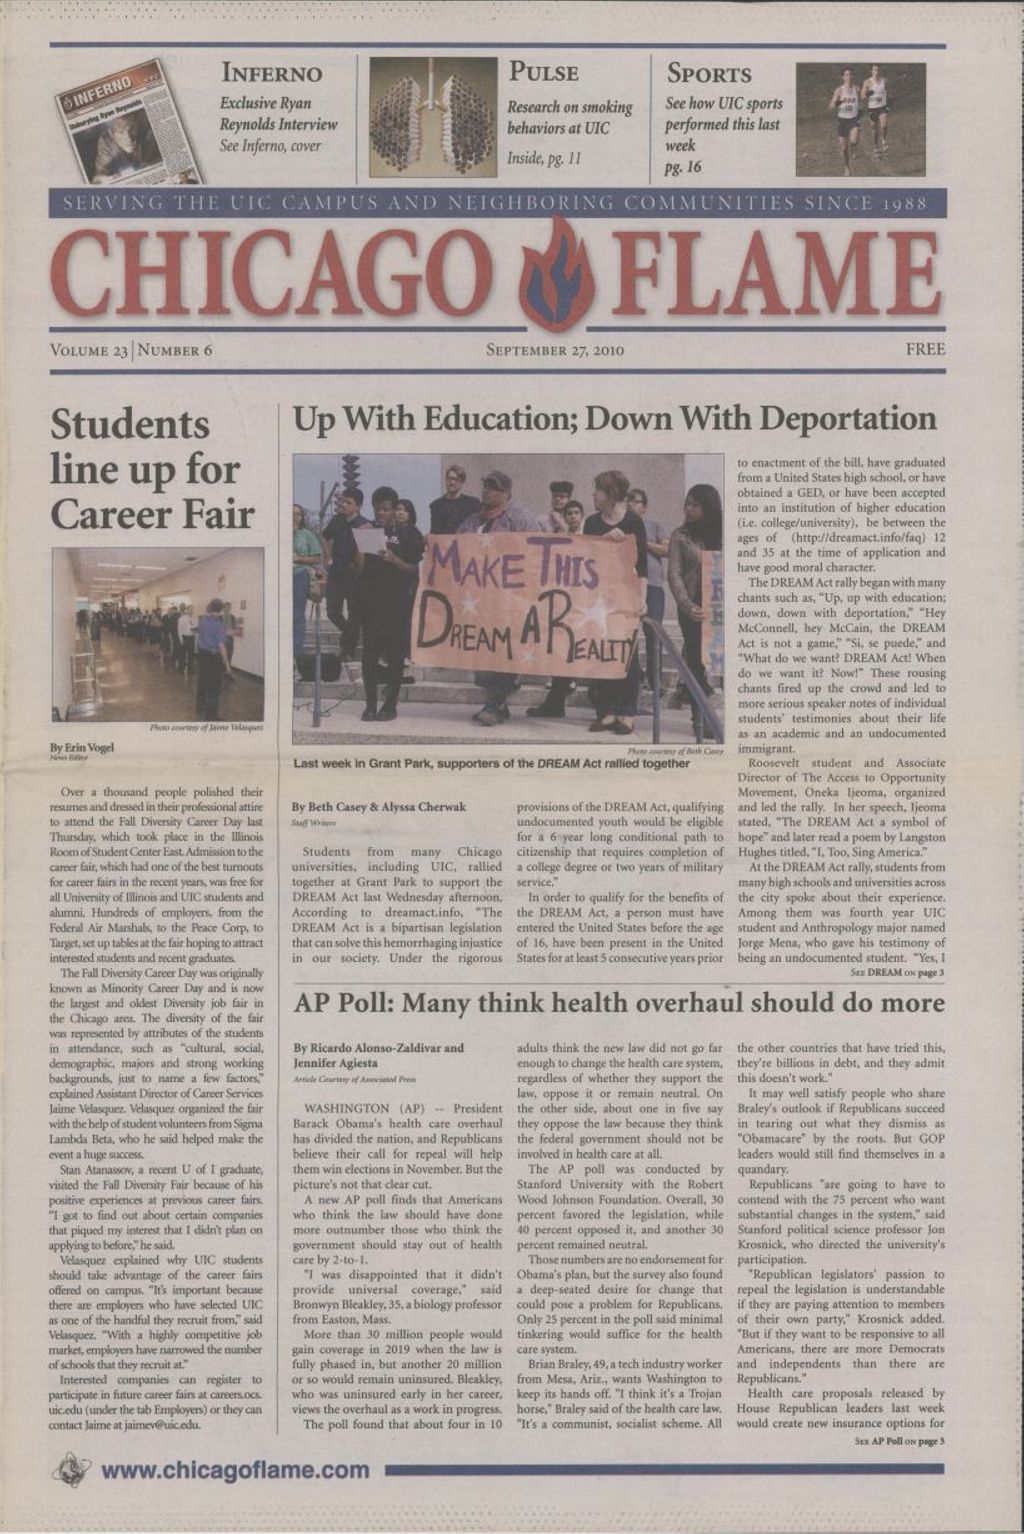 Miniature of Chicago Flame (September 27, 2010)